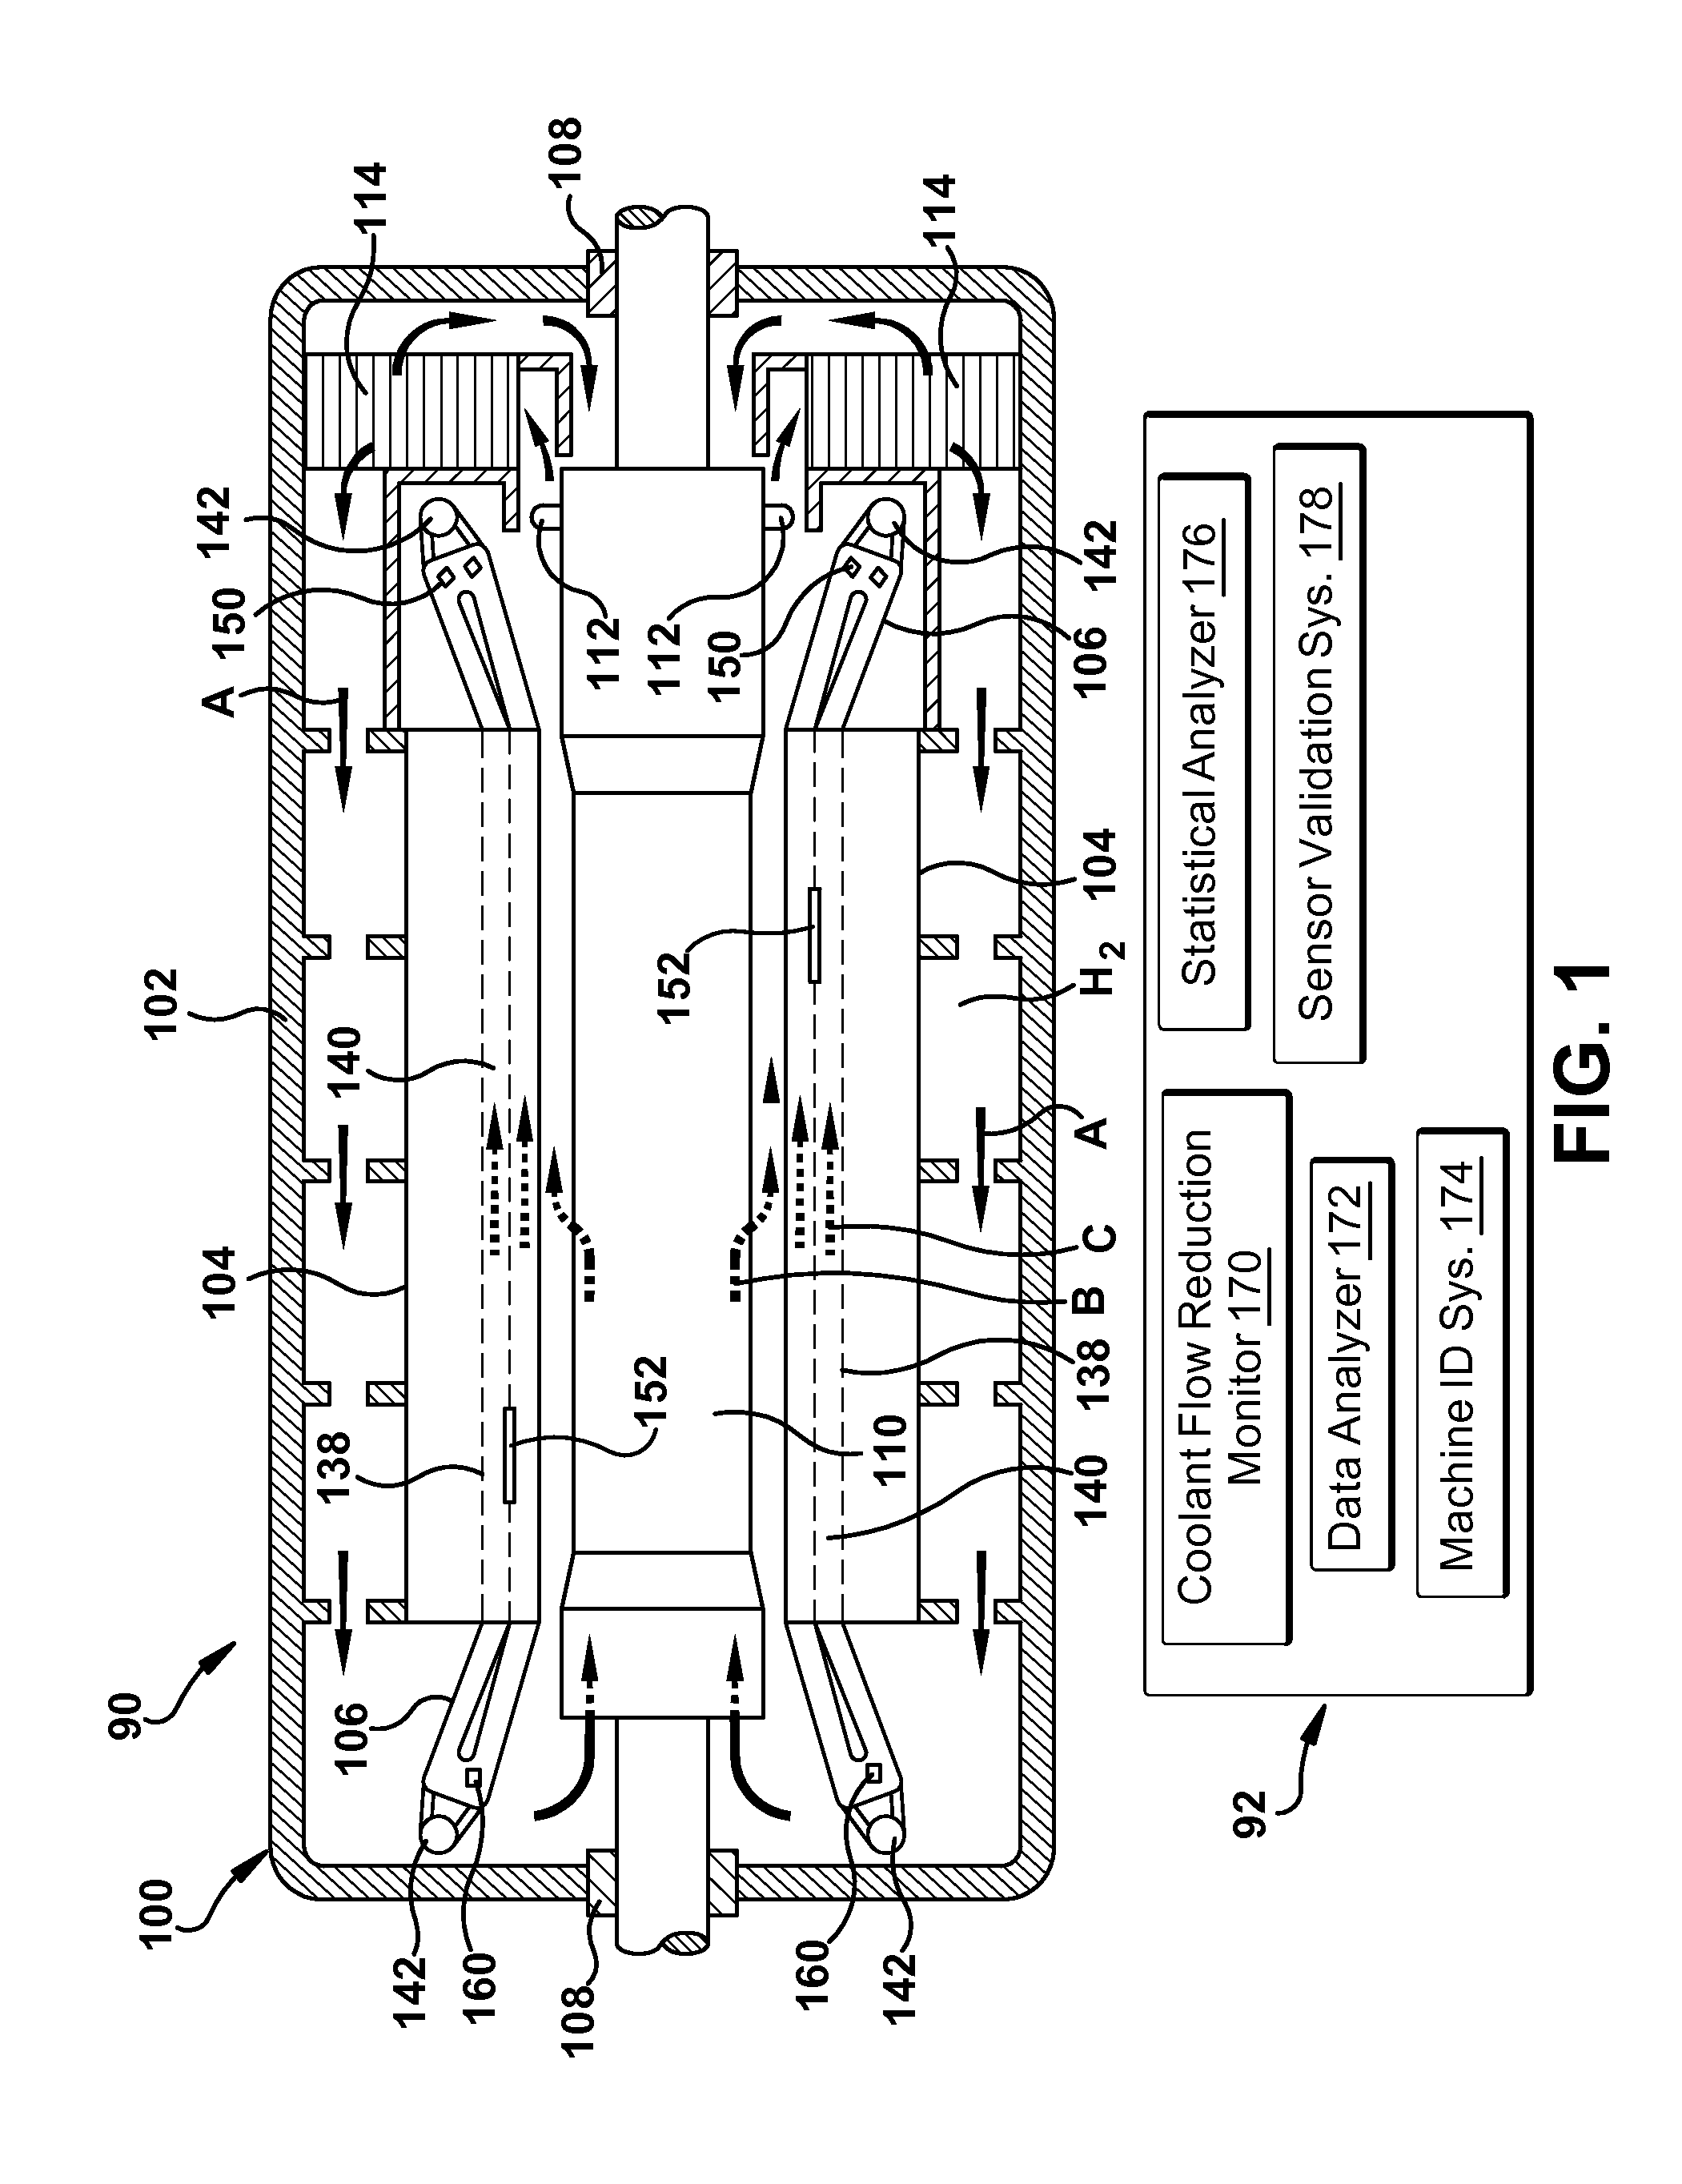 Stator coil coolant flow reduction monitoring